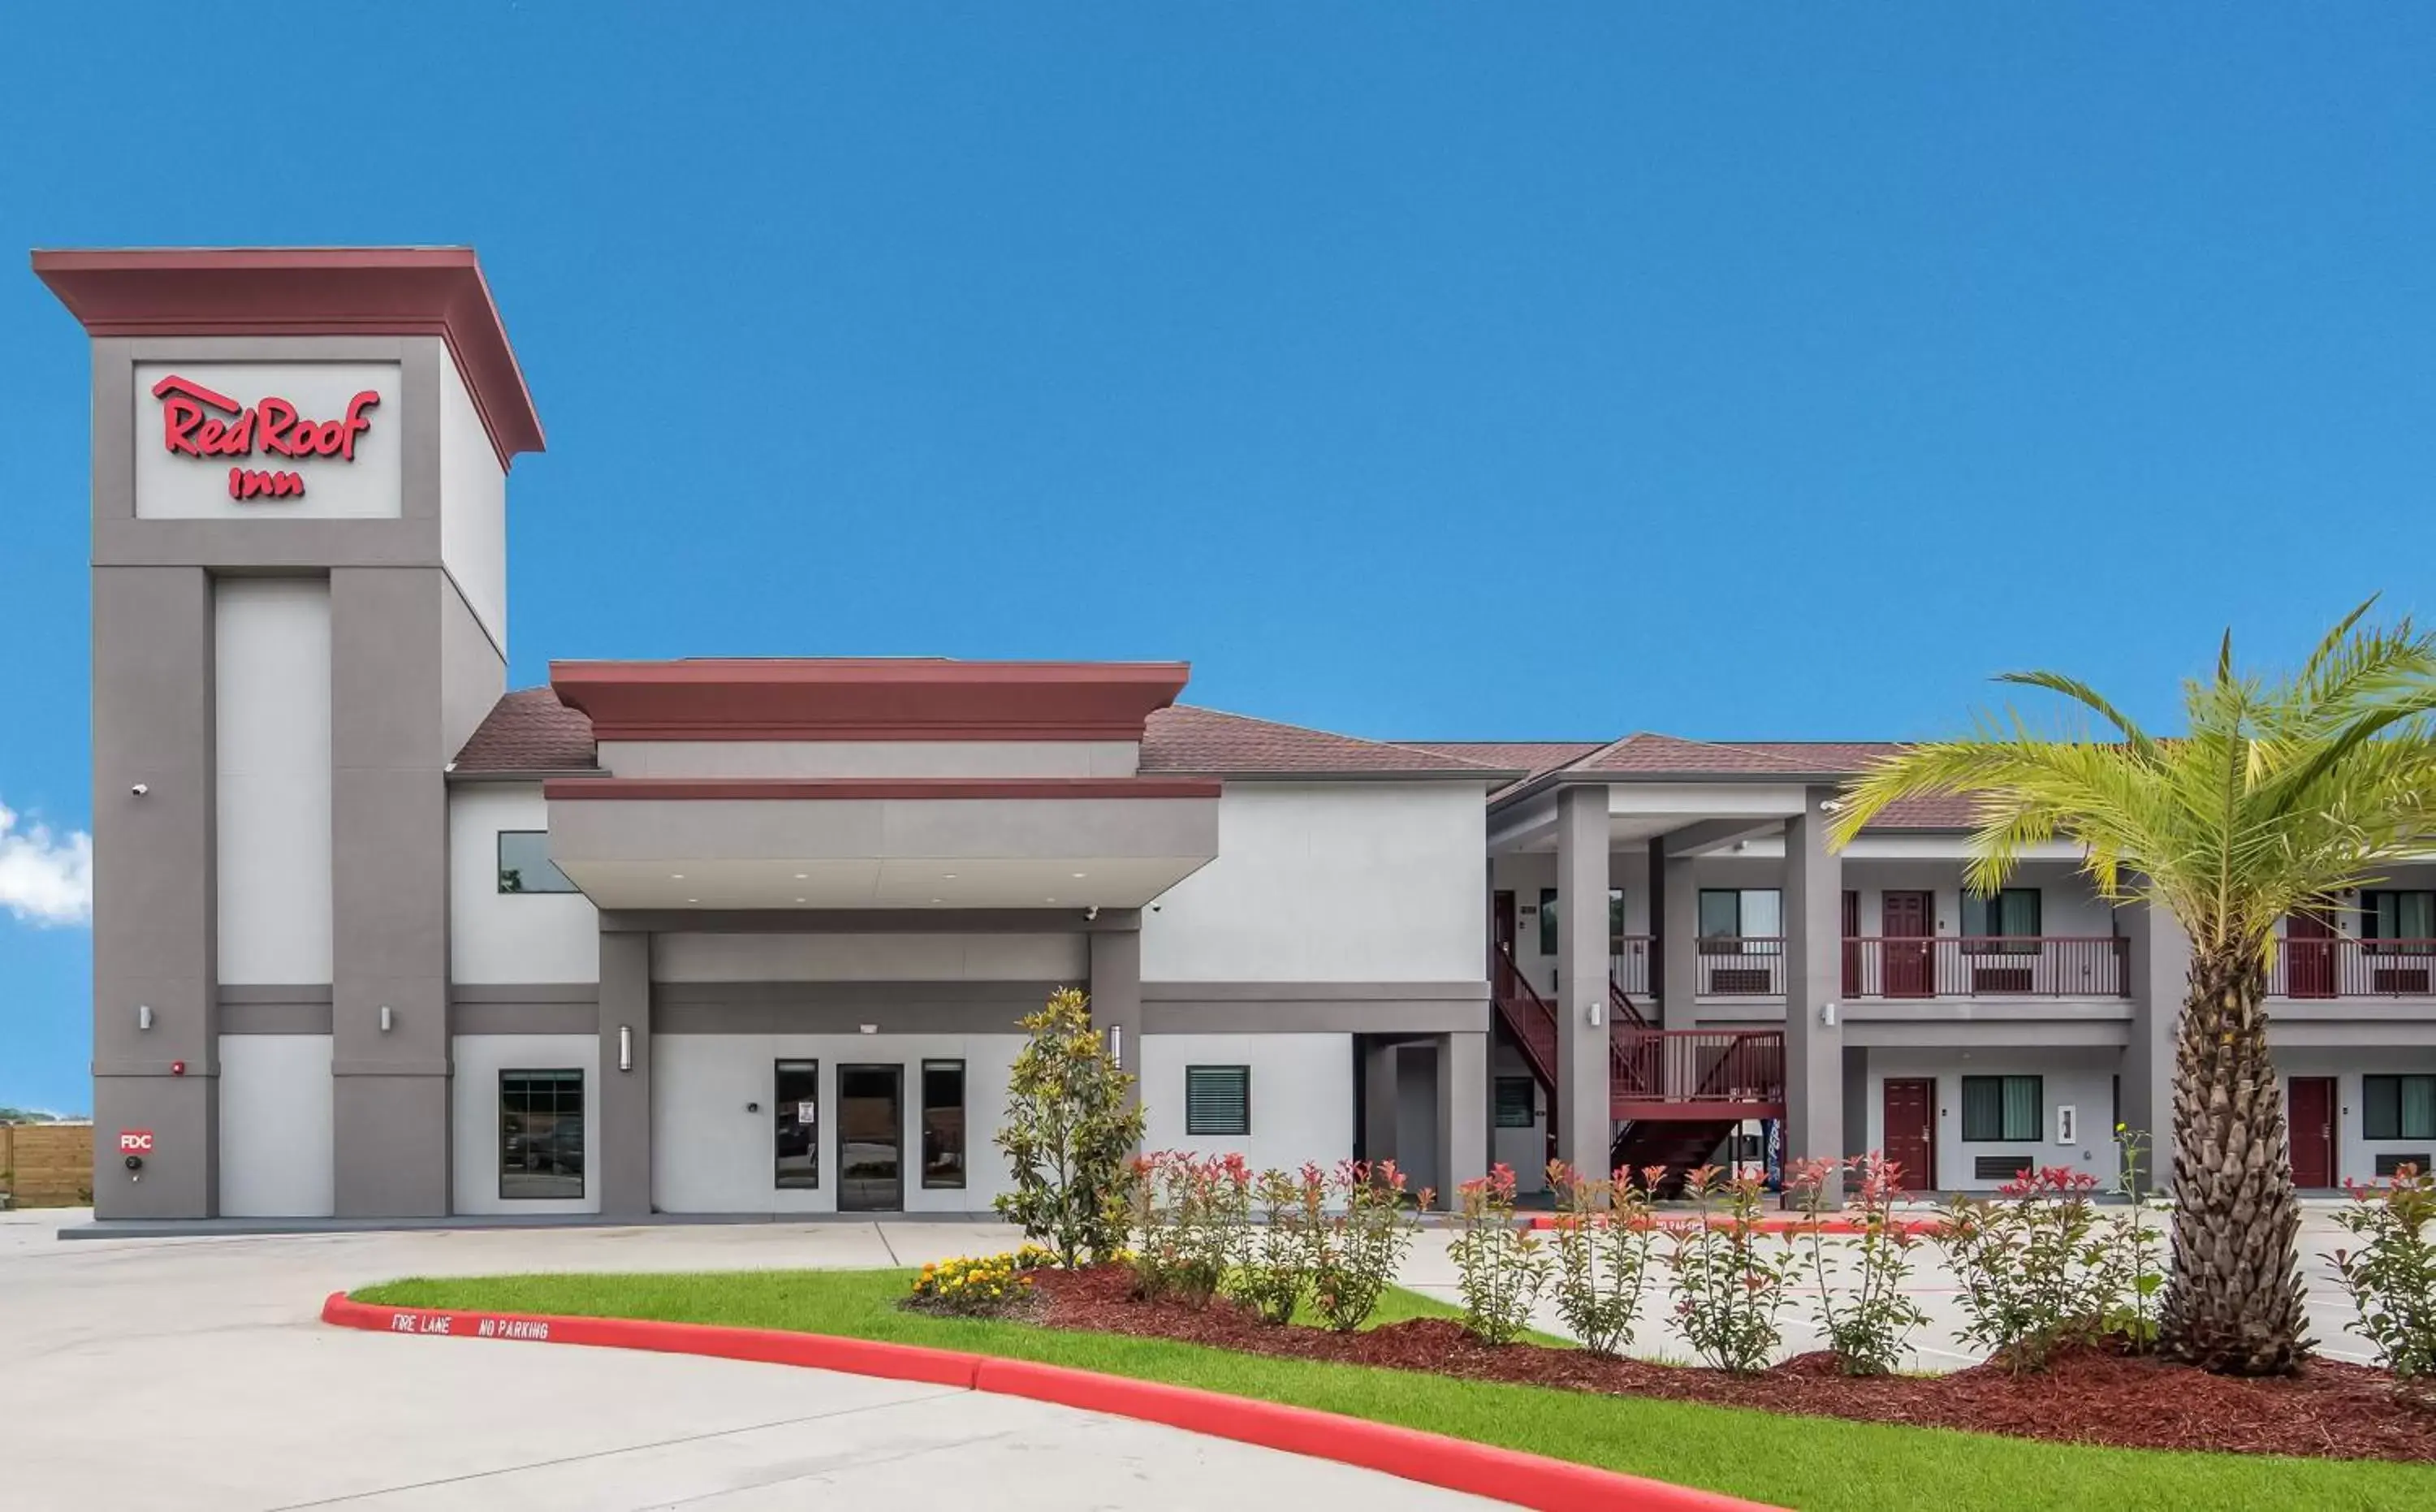 Property Building in Red Roof Inn Baytown